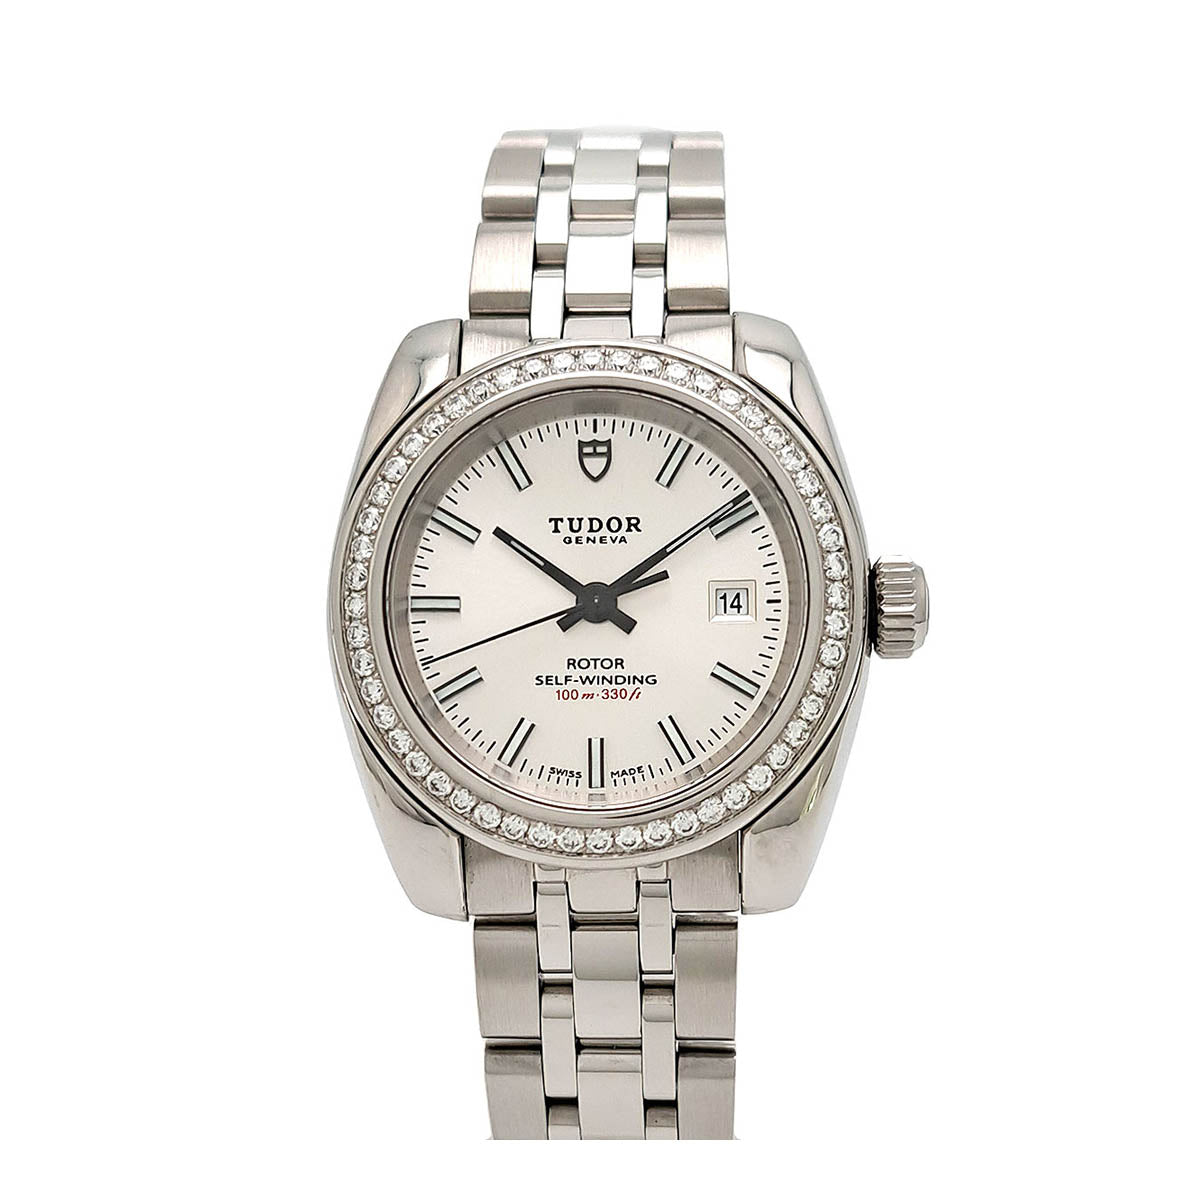 Tudor Classic Date Automatic Stainless Steel Women's Watch with Diamond Bezel 22020.0